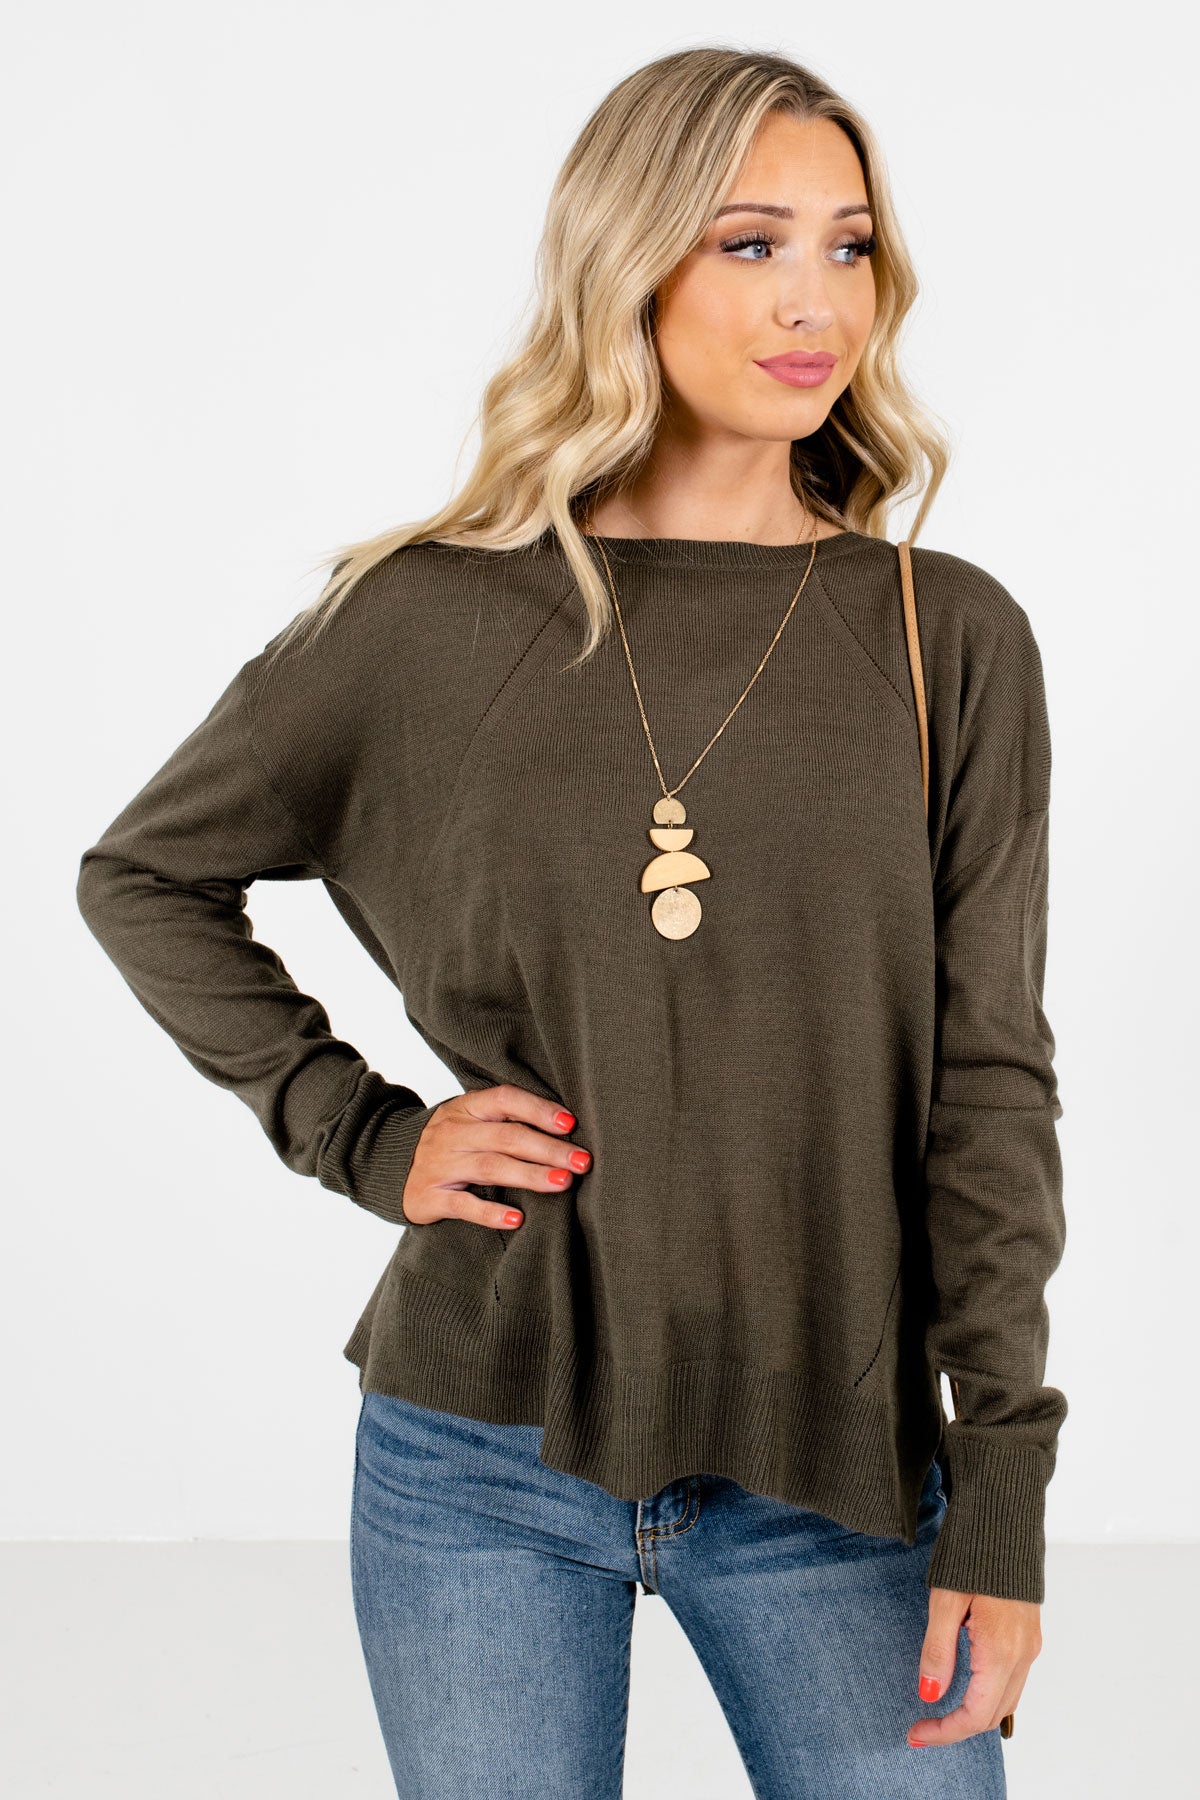 Olive Green Decorative Button Boutique Sweaters for Women